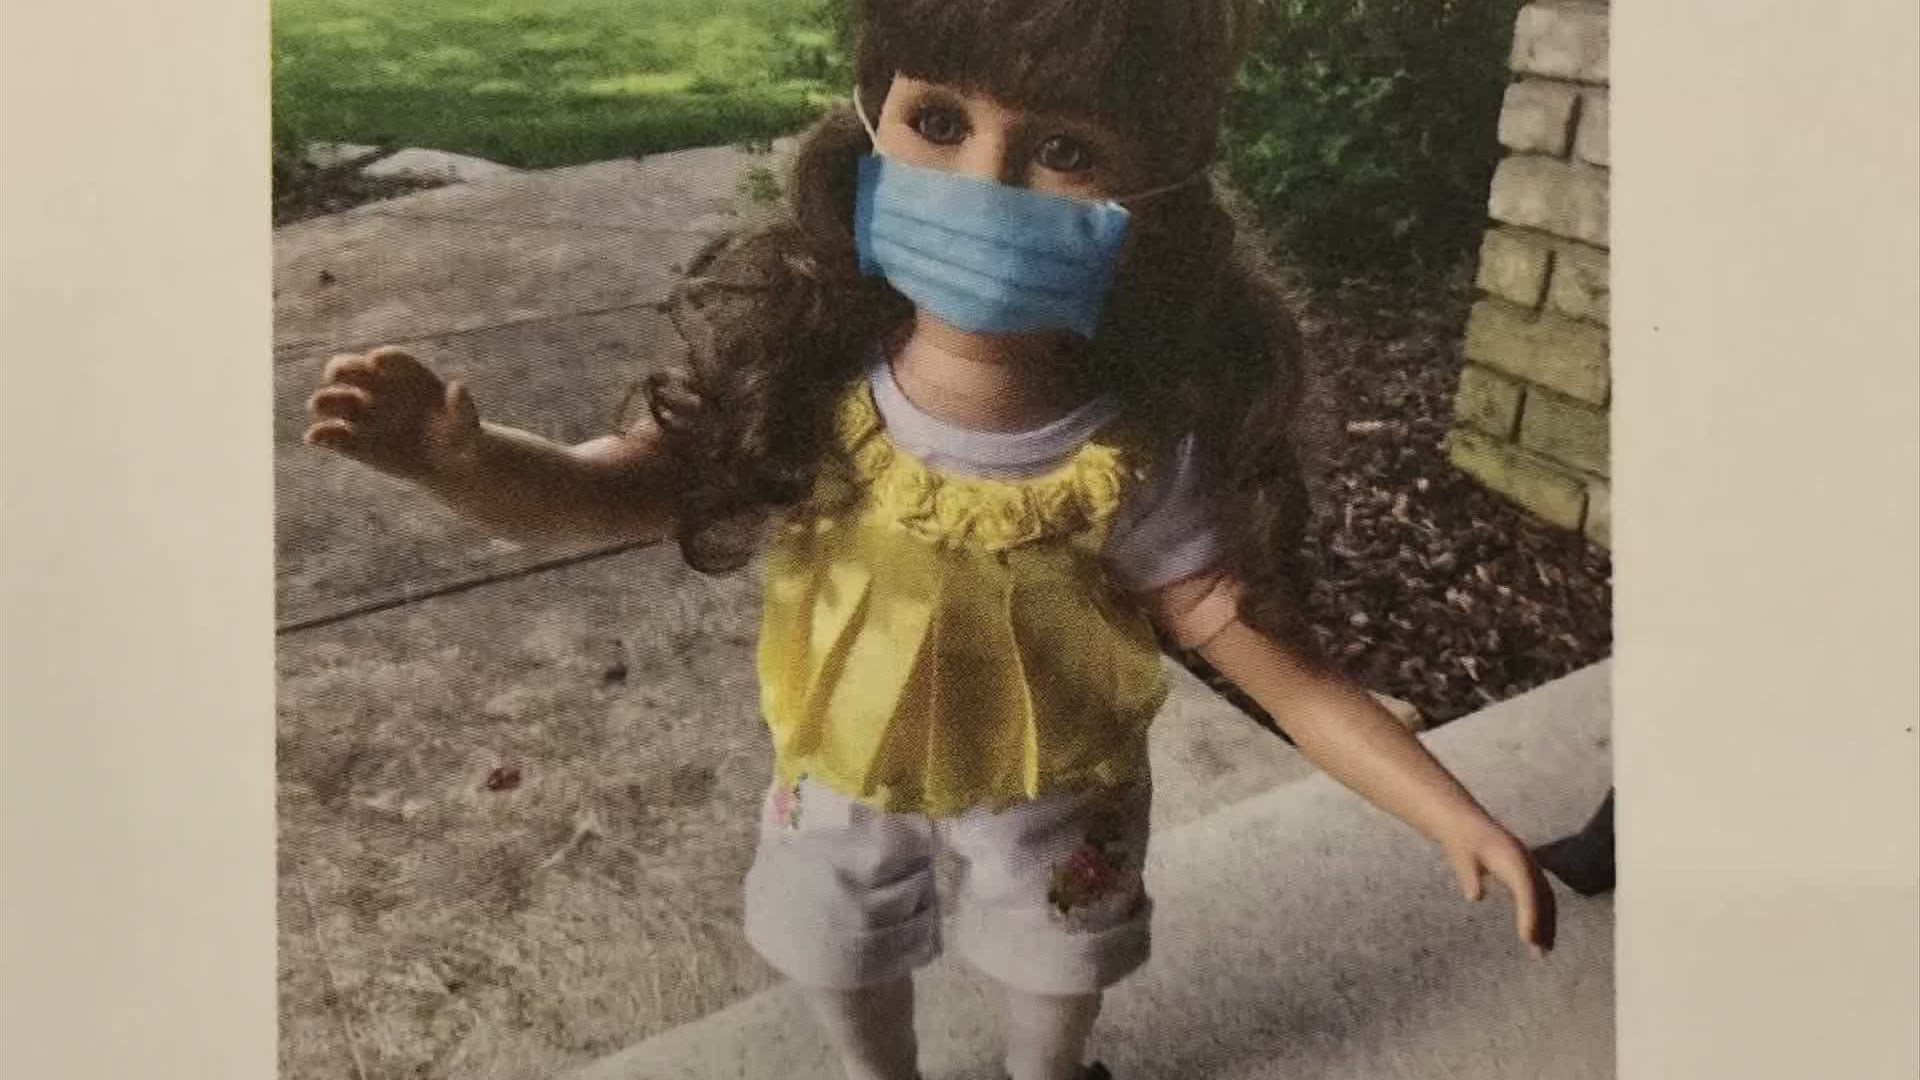 The Pickerington woman uses her dolls to make greeting cards to lift spirits during pandemic.